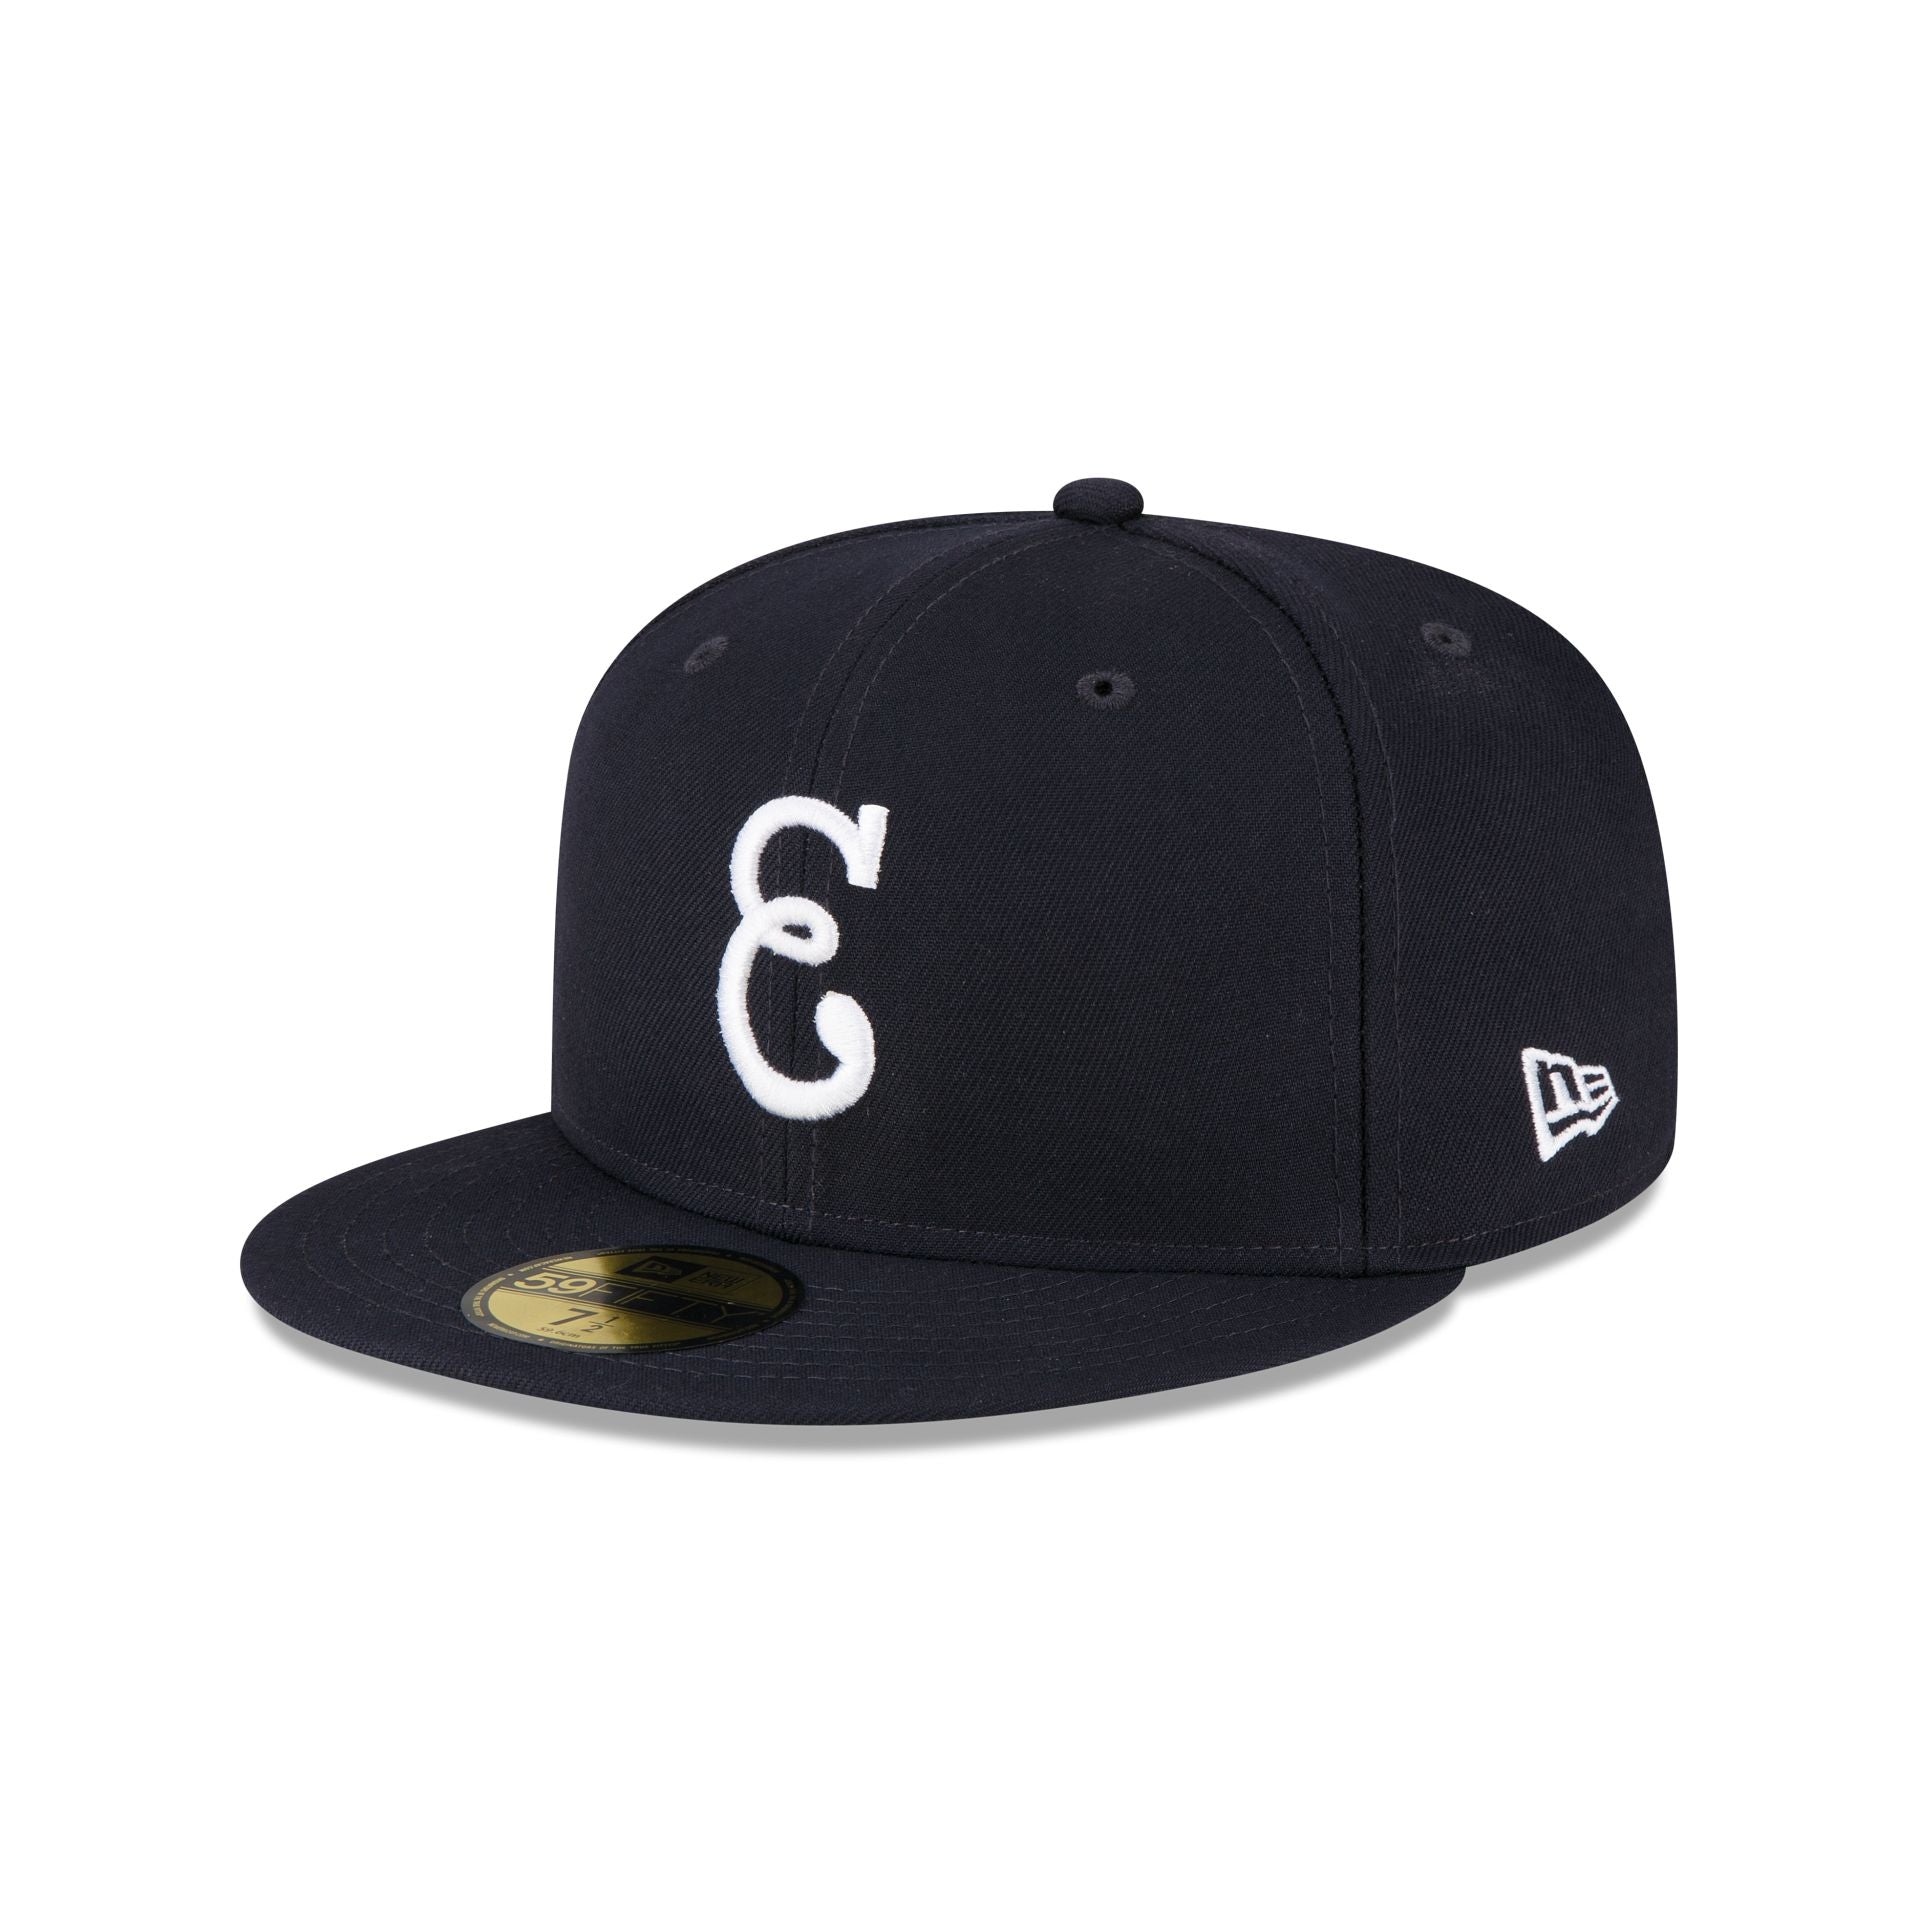 Check out the new White Sox hats designed by Chance the Rapper